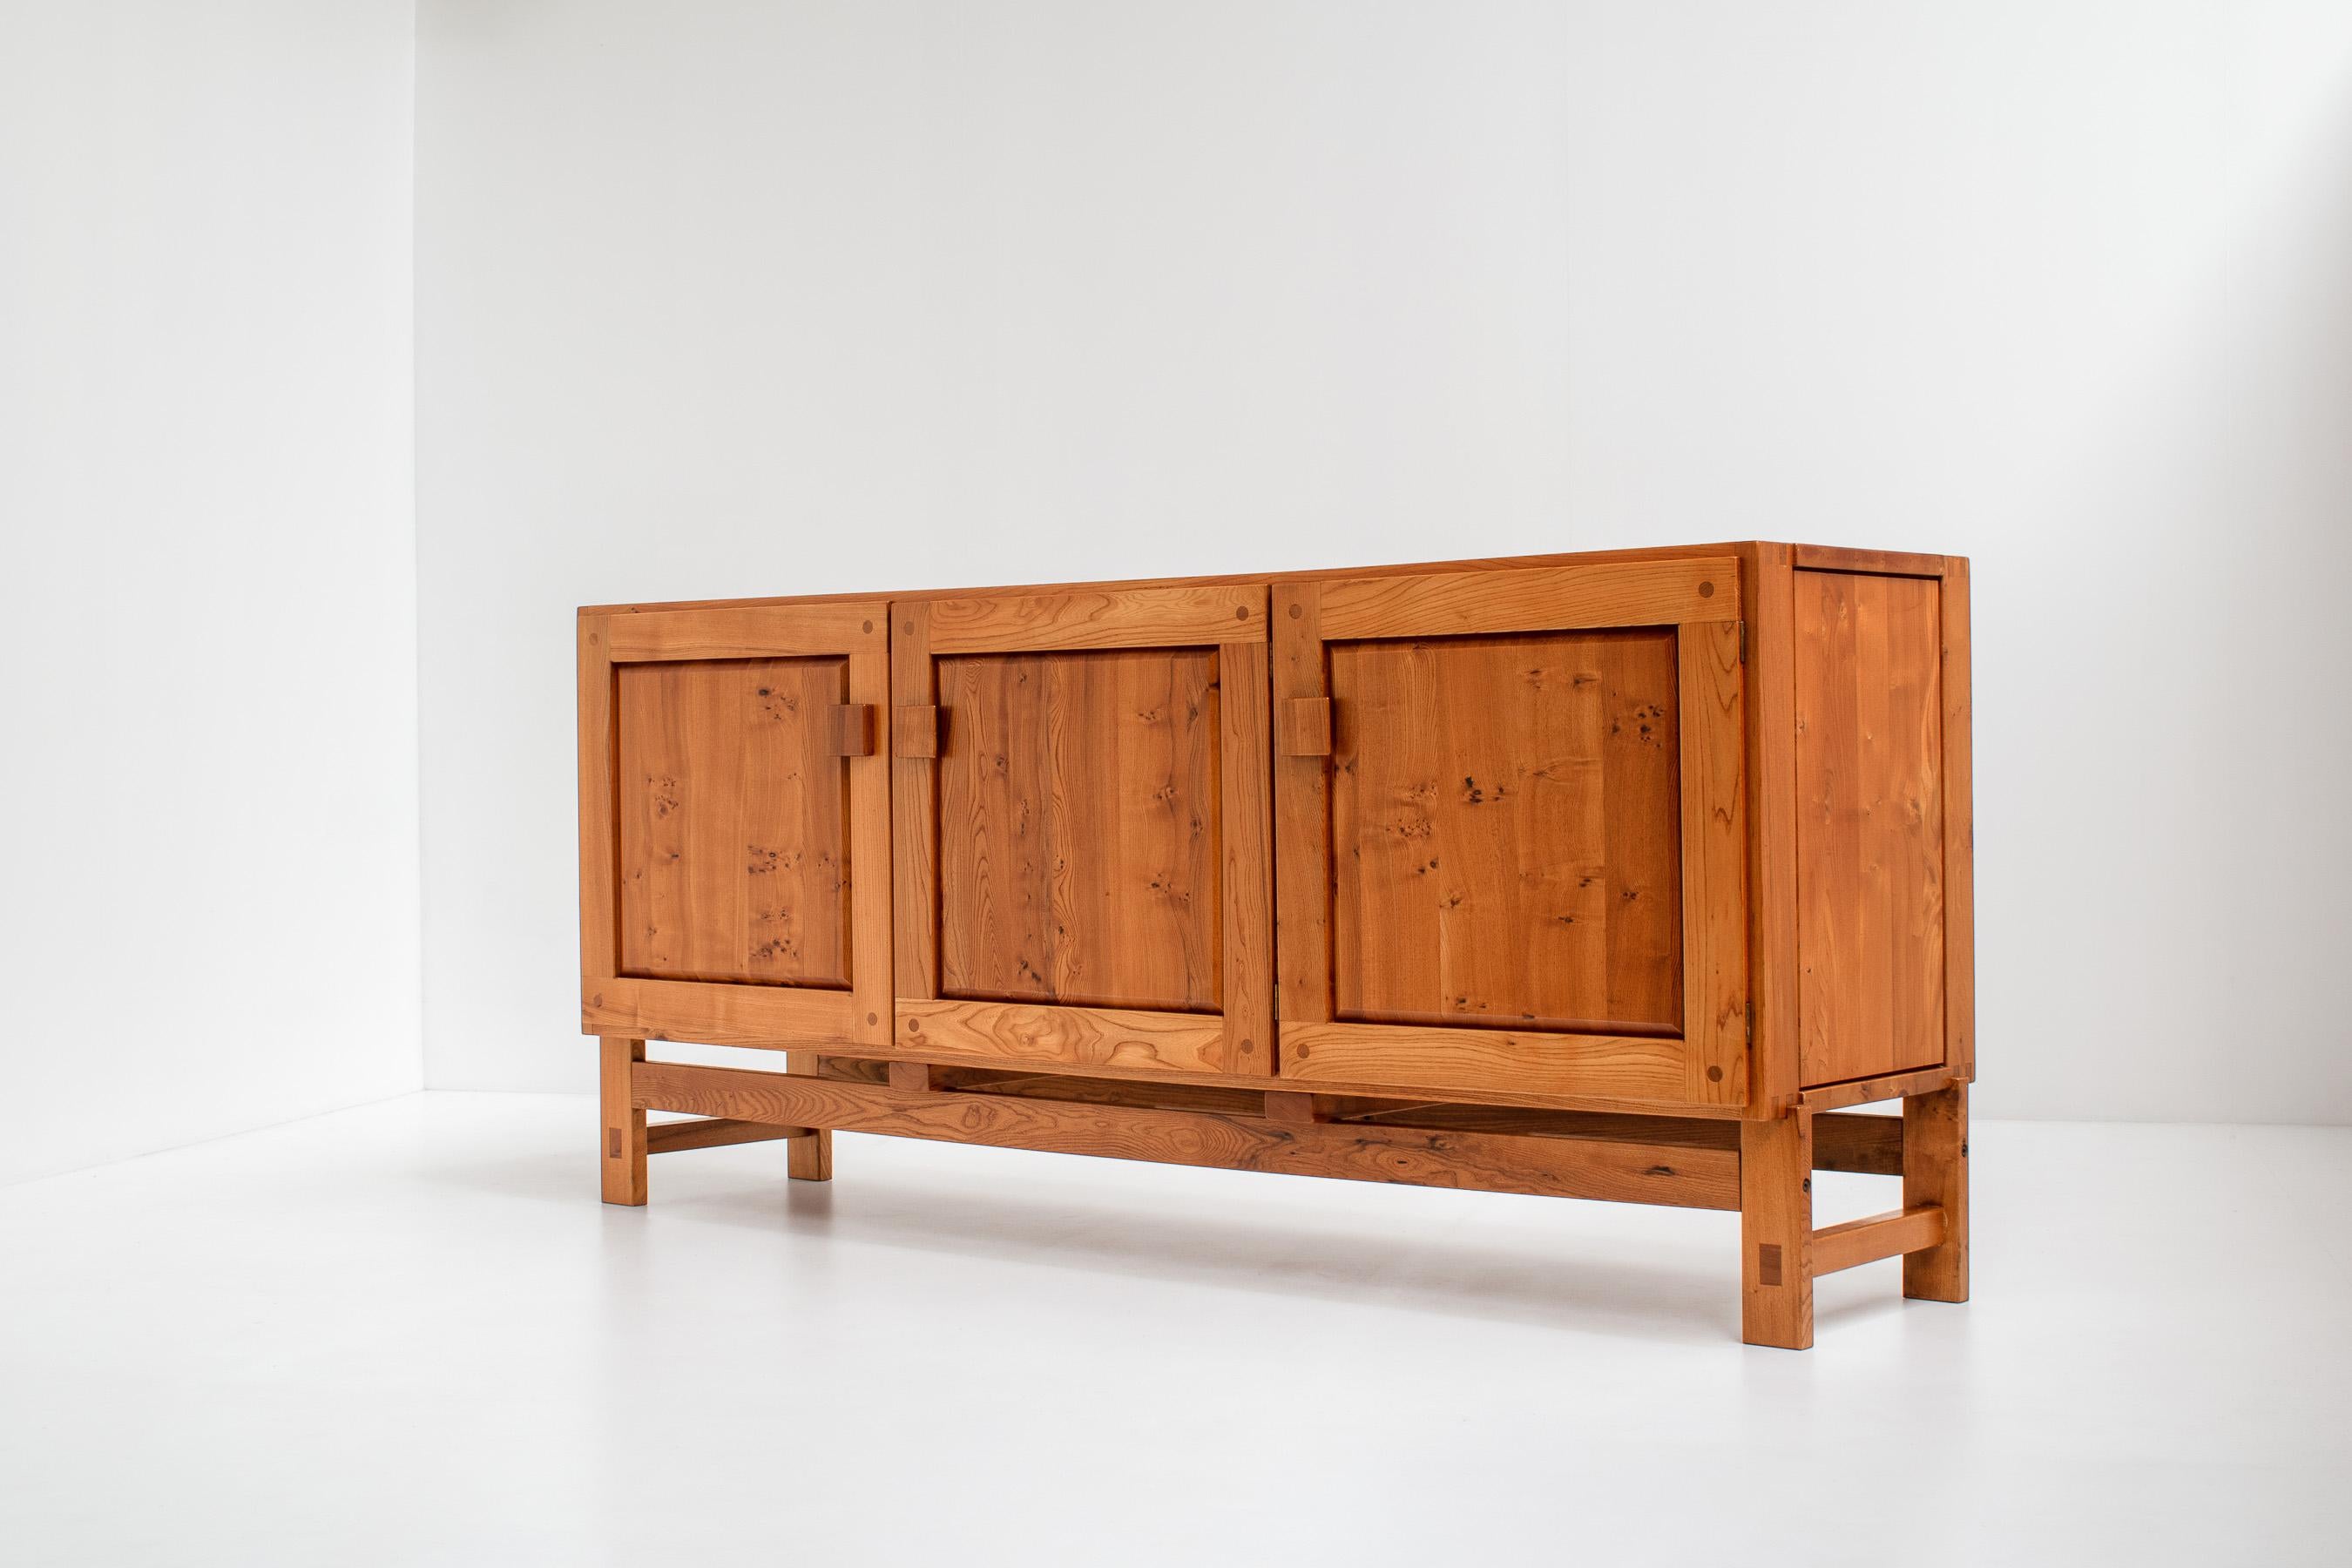 Rare Pierre Chapo, sideboard model 'R06B', elmwood, France, designed in 1960s.

This sideboard is almost never seen before and what makes it really rare, is that there are no reproductions of it, unlike some of the other items of Chapo.